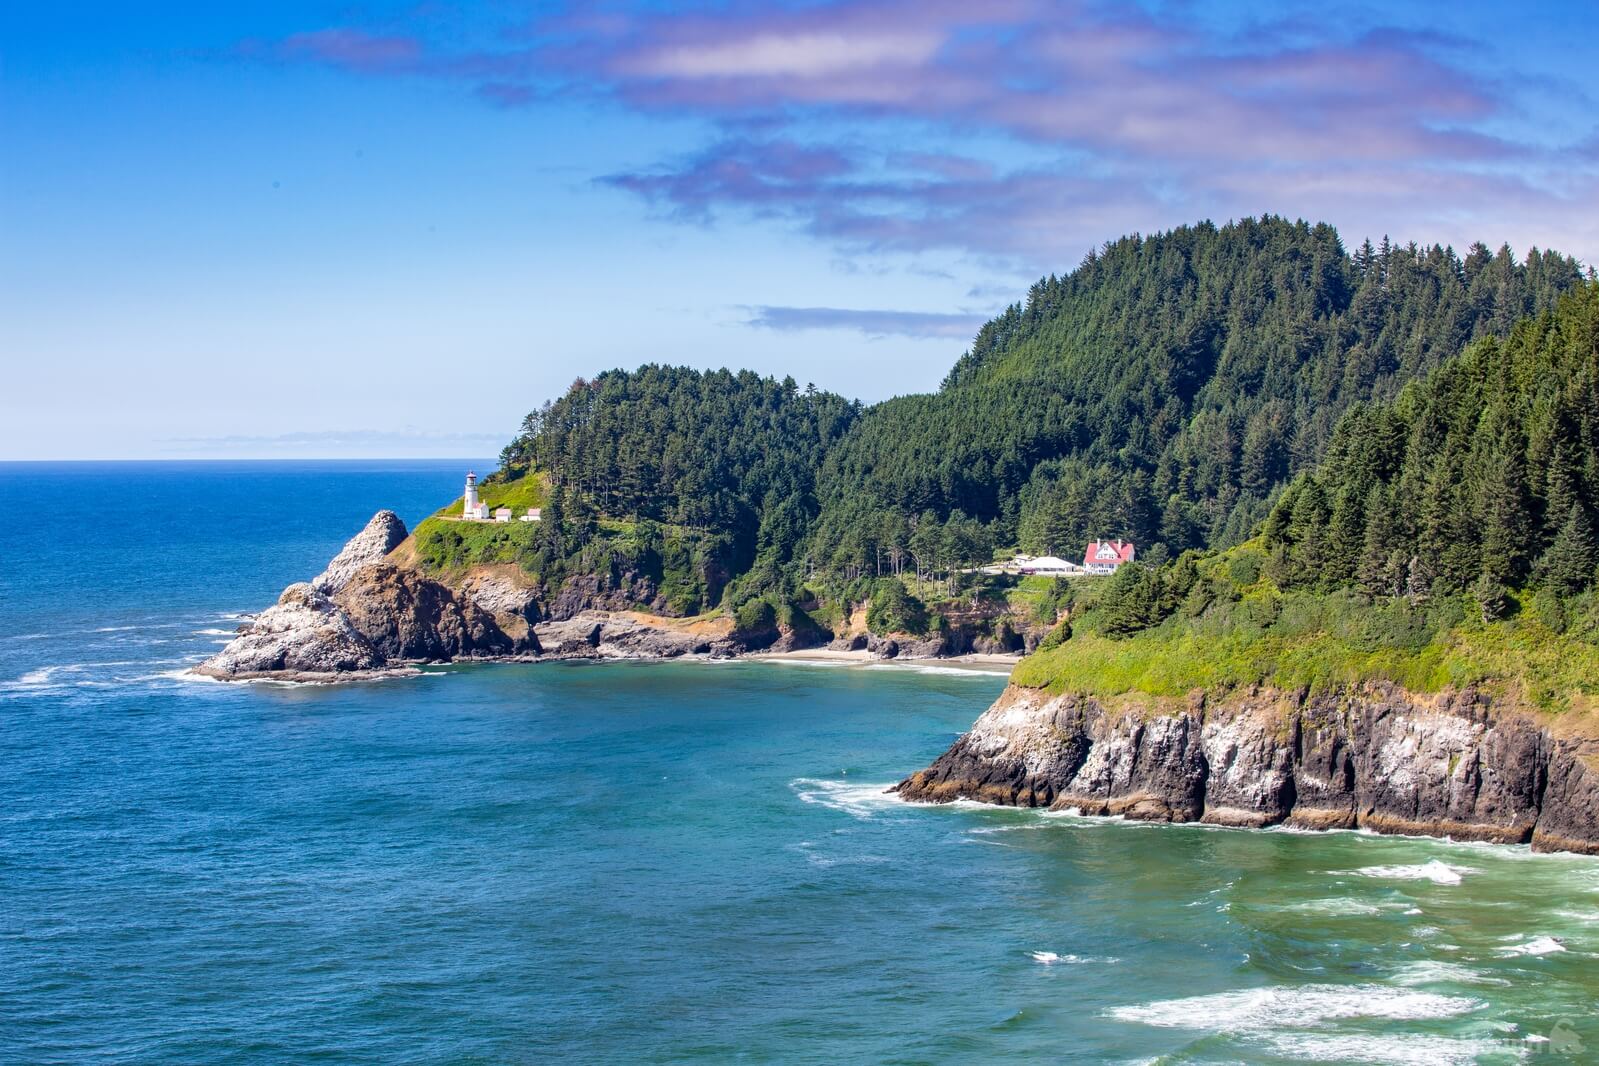 Image of Heceta Head Lighthouse by Darrell Evans